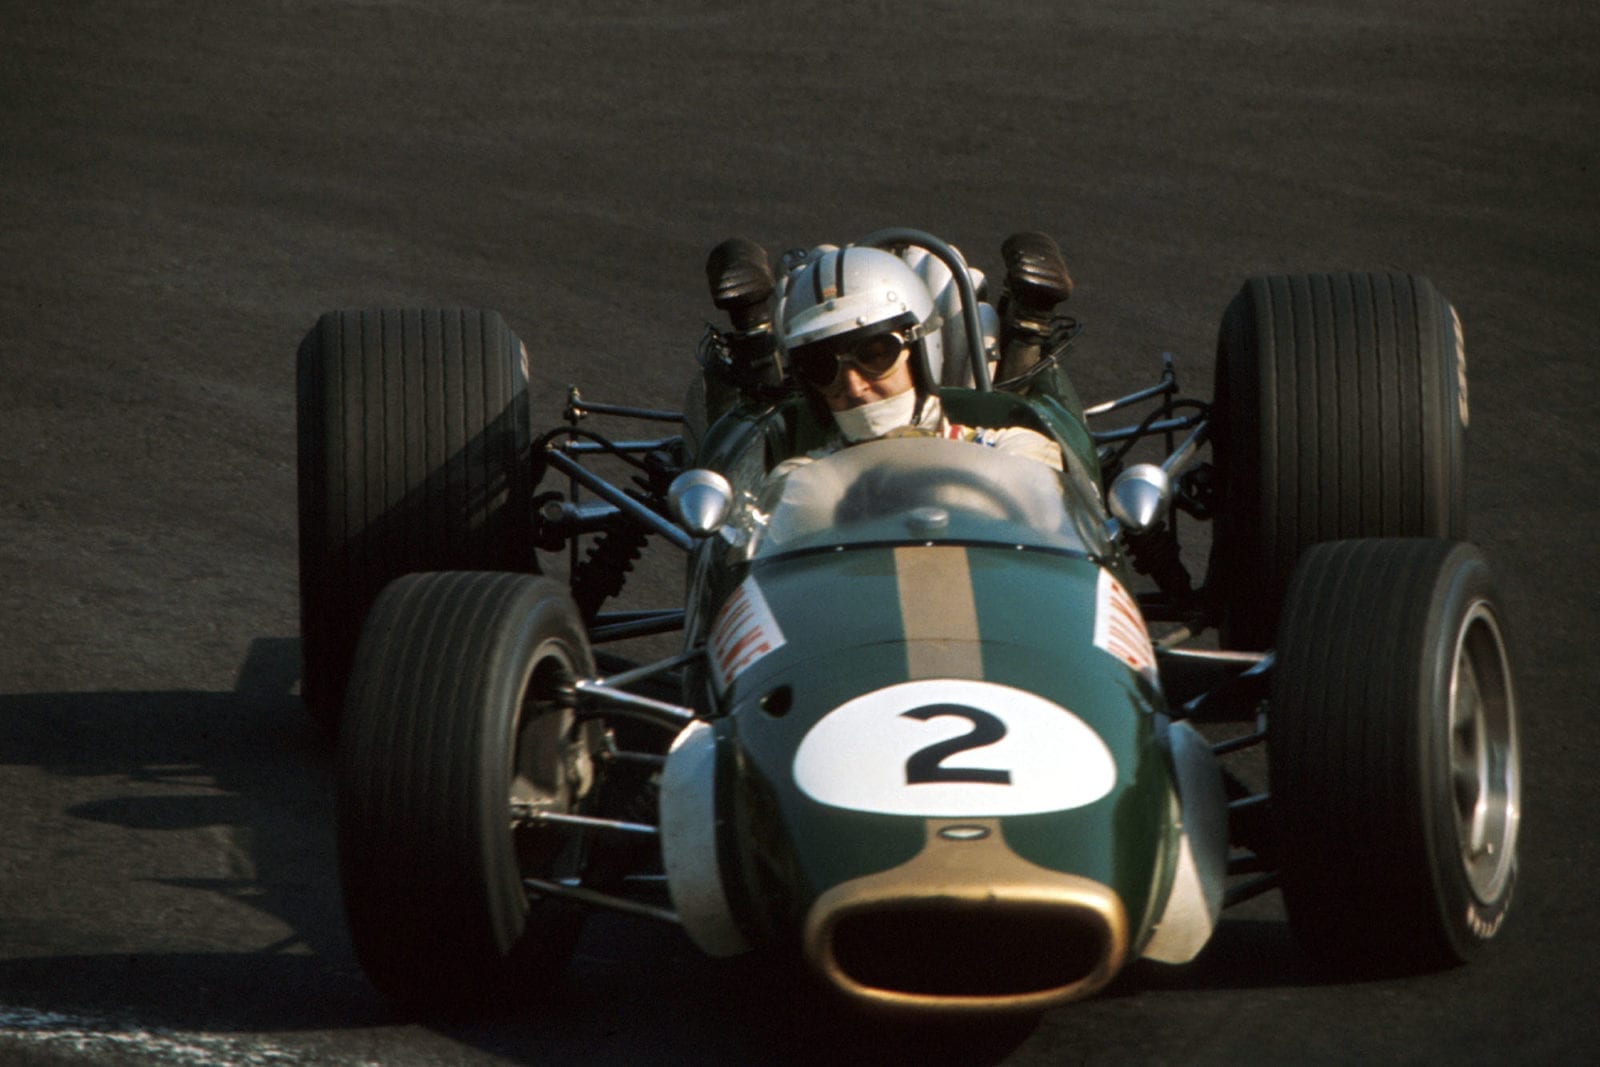 Denny Hulme (NZL) Brabham Repco BT24 finished in 3rd place. Mexican Grand Prix, Mexico City, 22 October 1967.